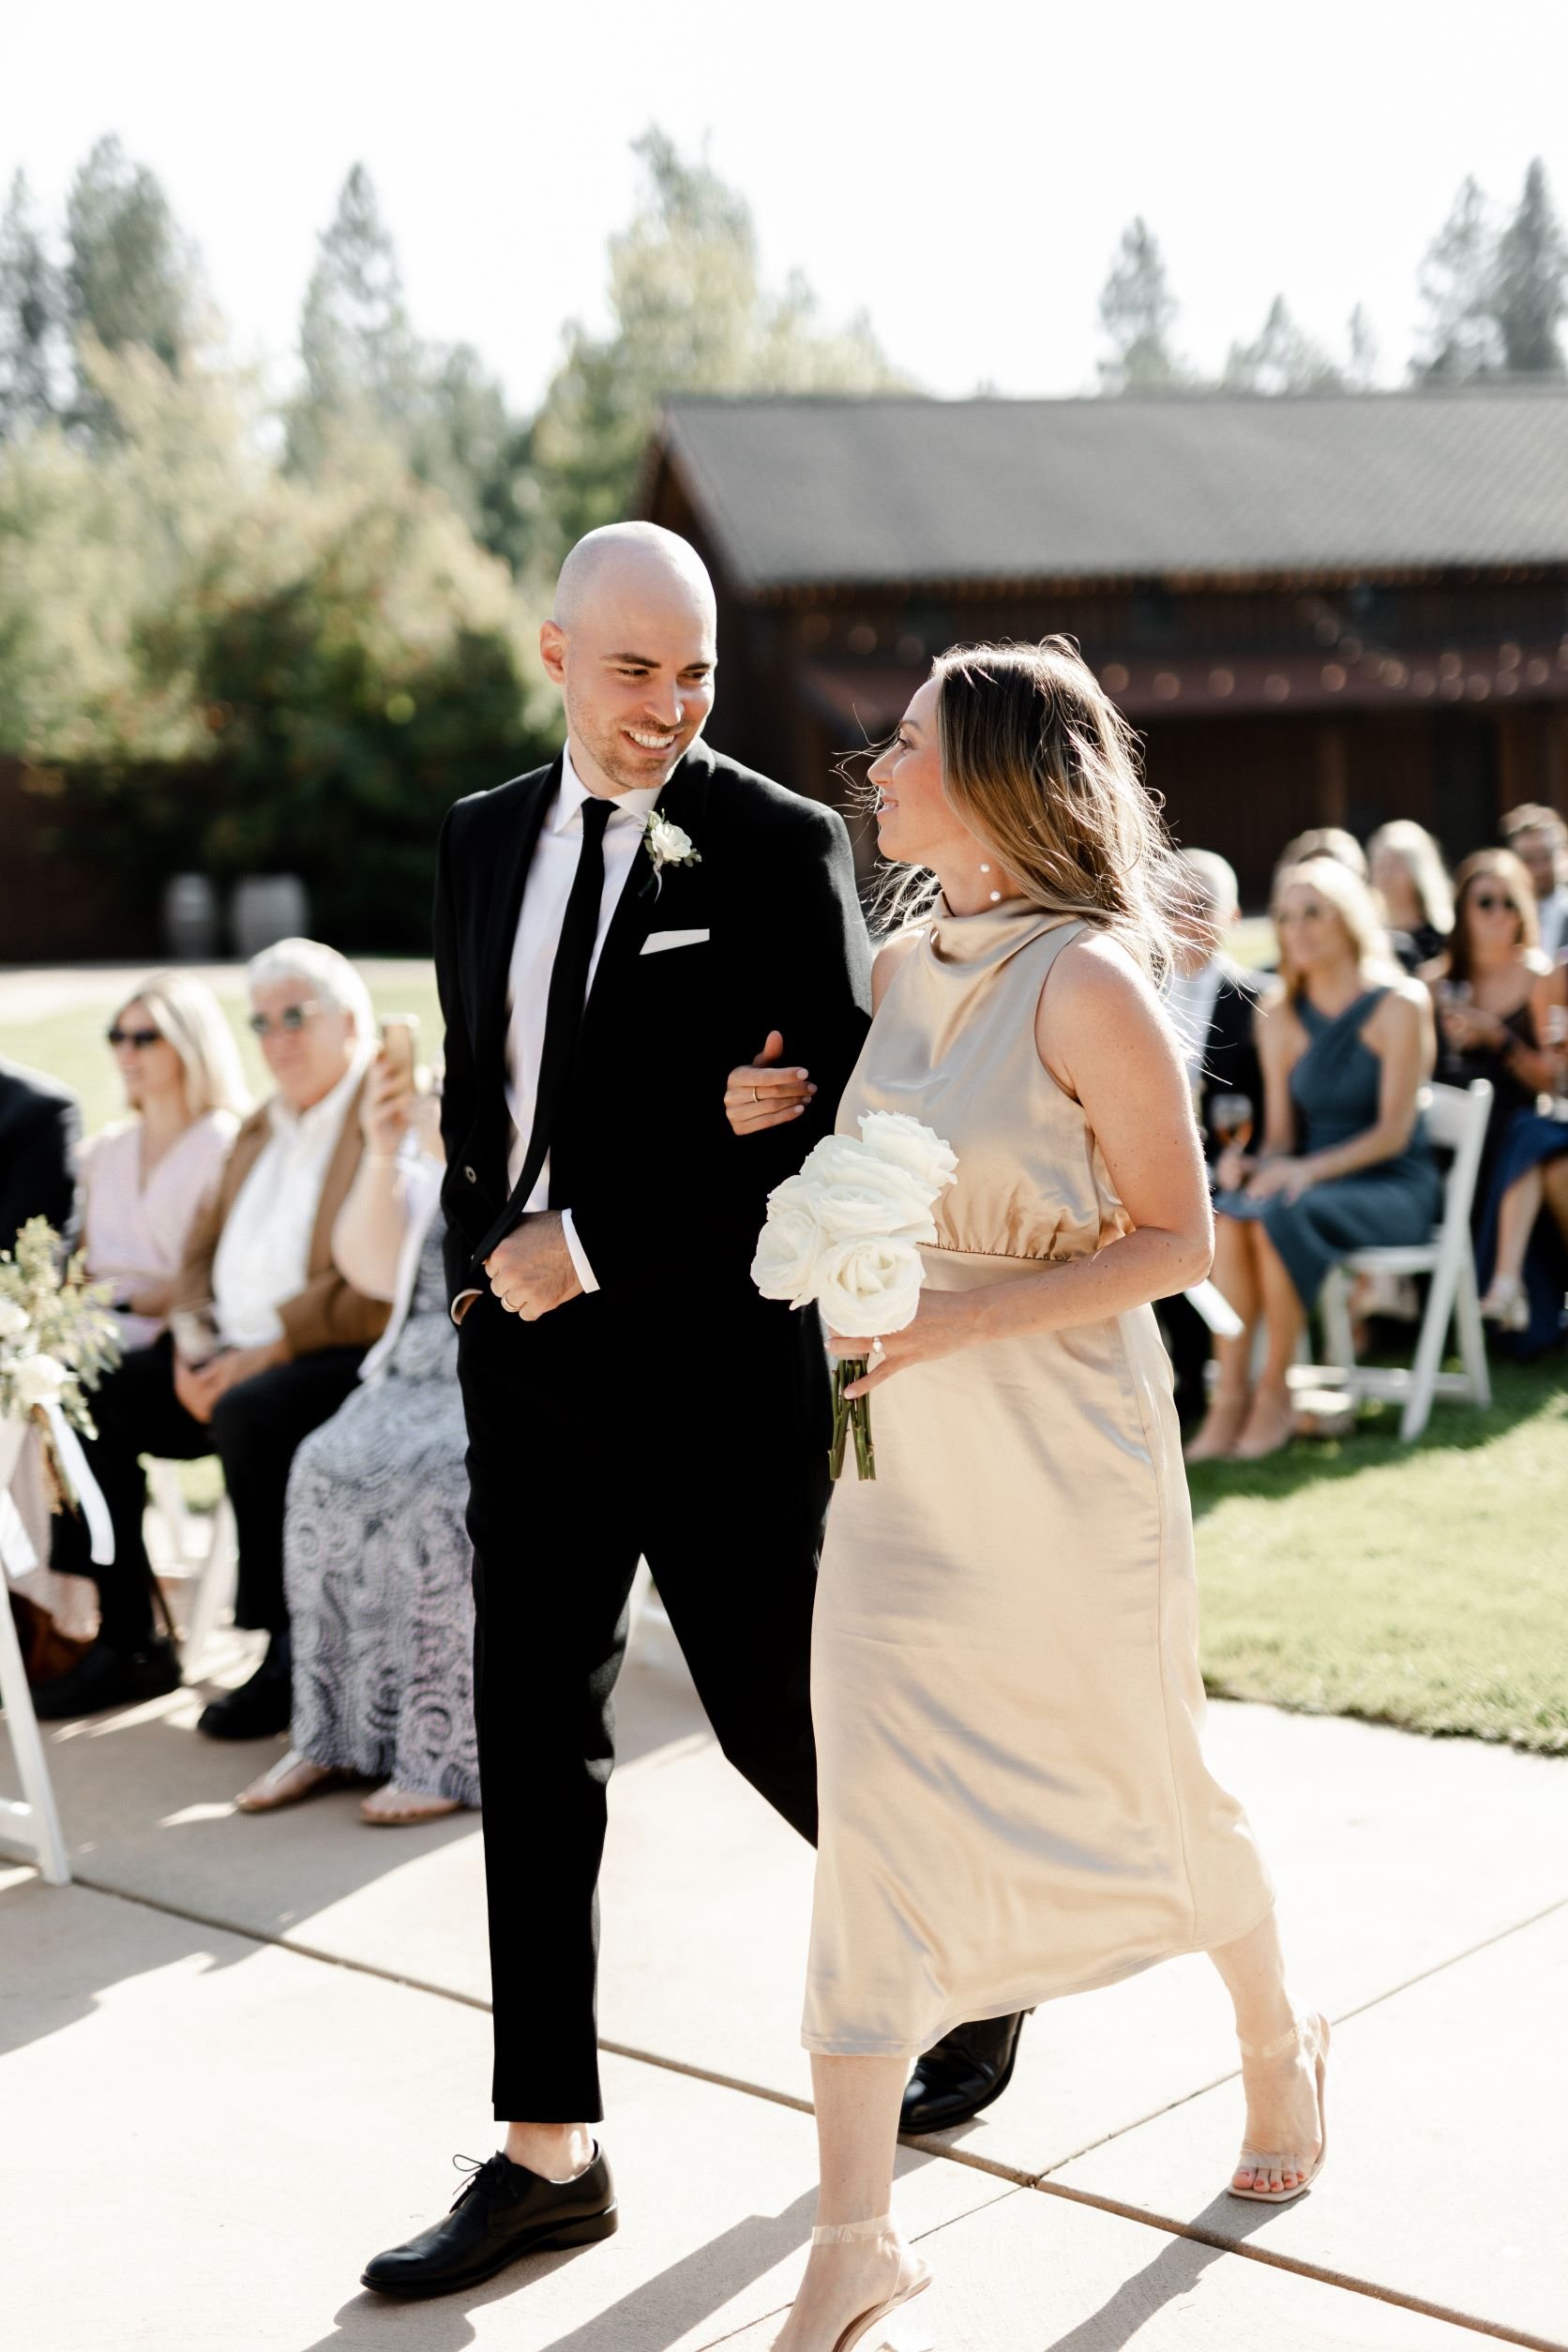 Candid-wedding-photos-from-Pacific-Engagements-wedding-ceremony-at-Swiftwater-Cellars